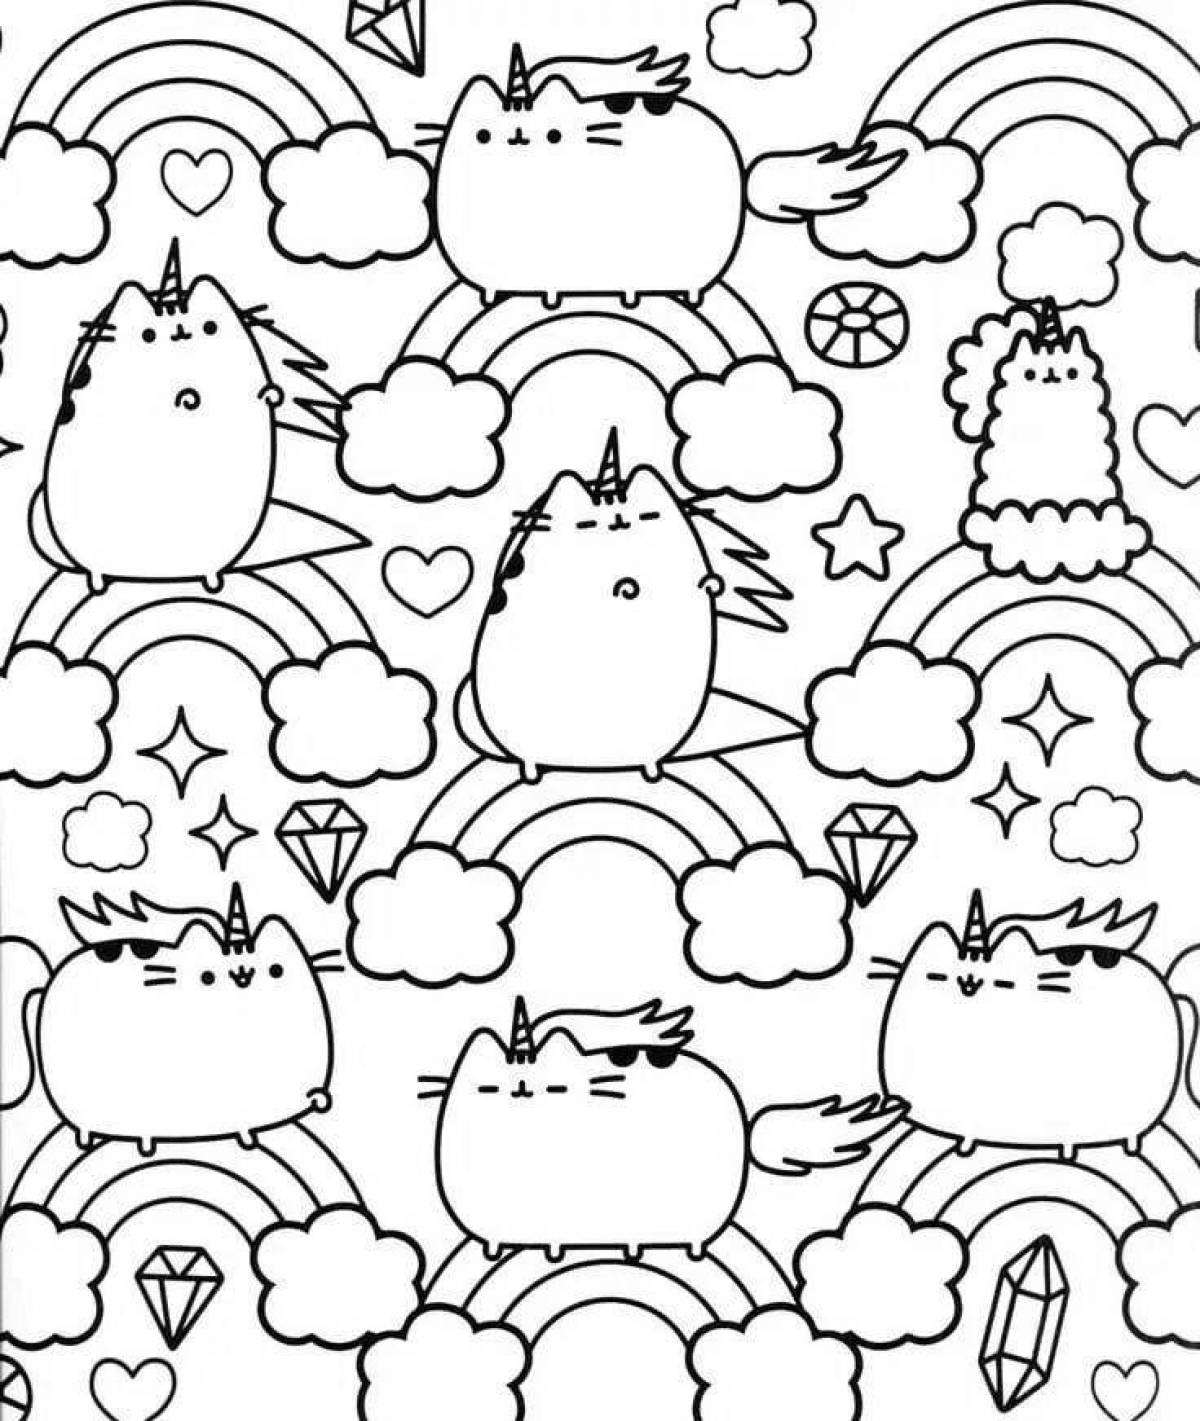 Naughty cute cat coloring page